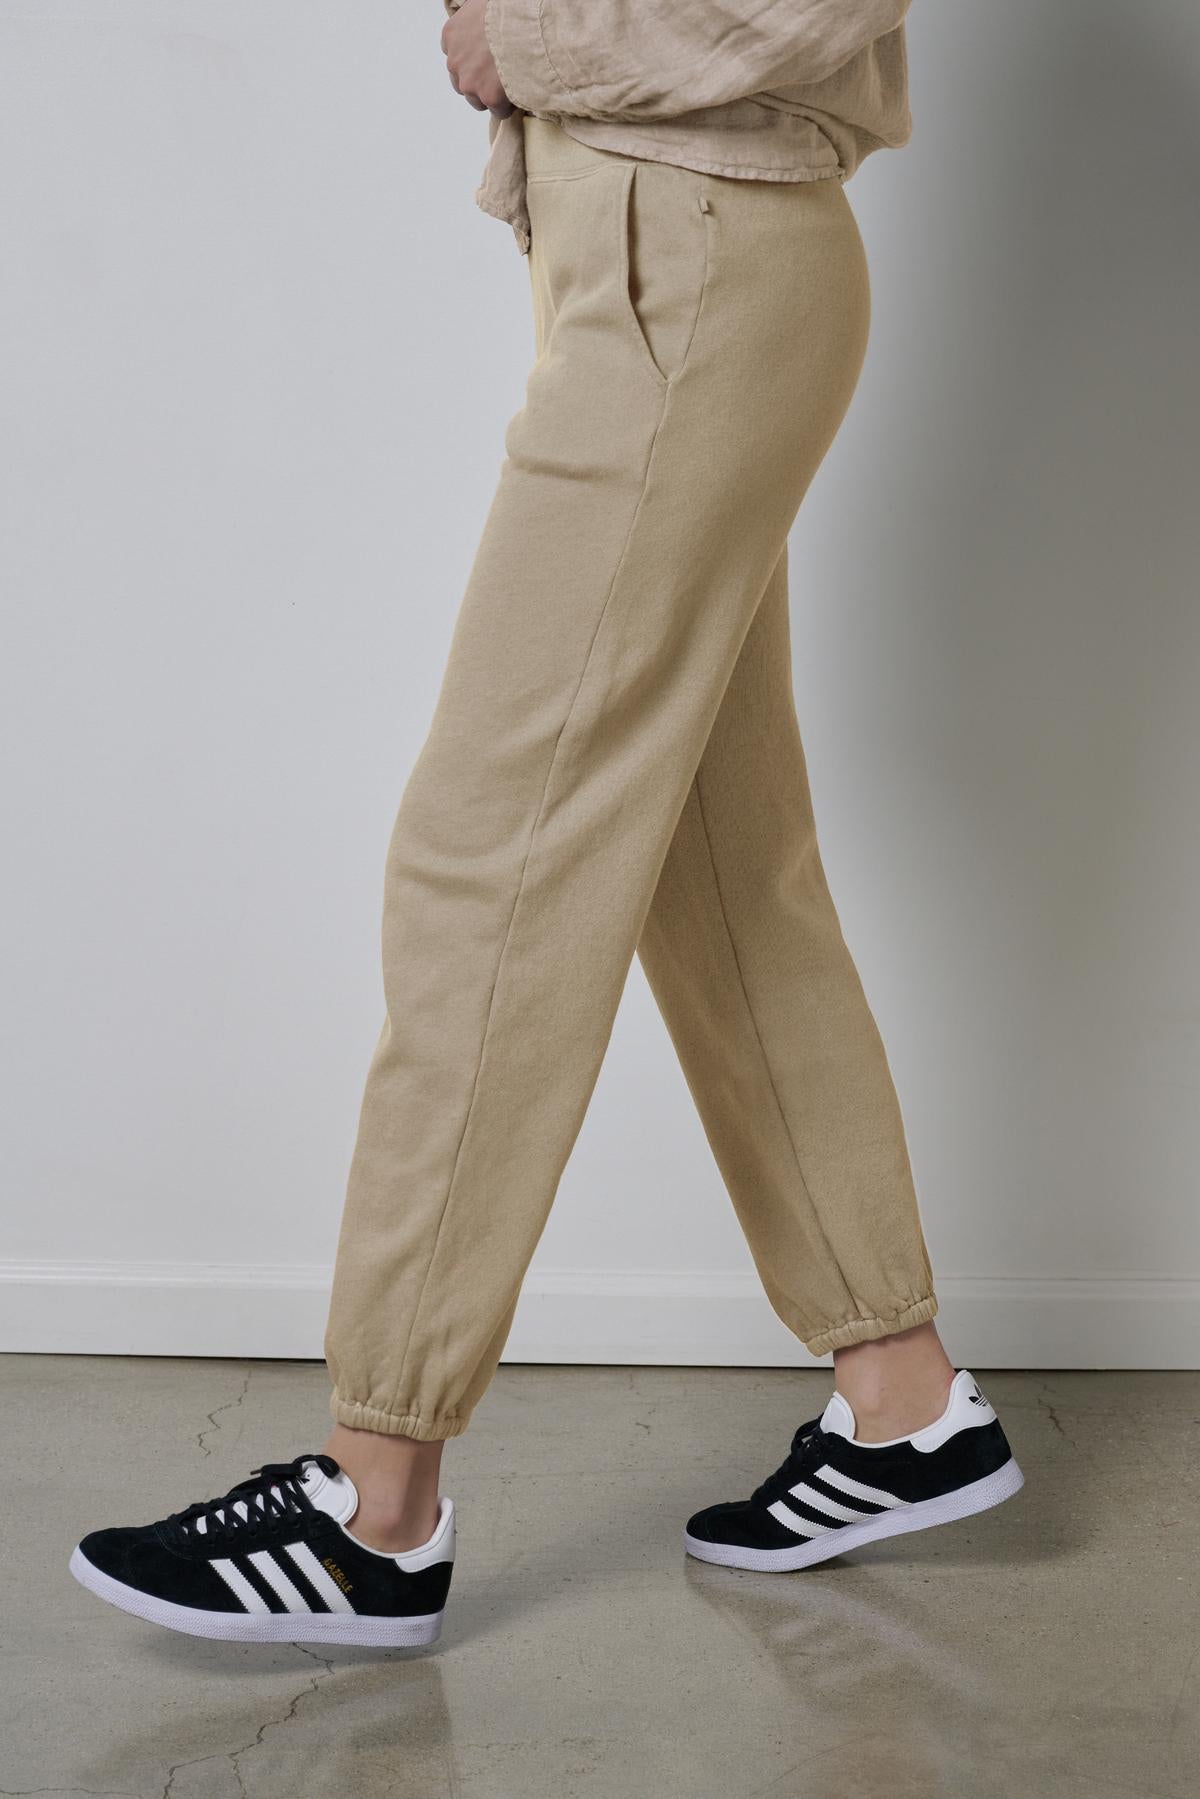 Person wearing sustainable fashion, Velvet by Jenny Graham's ZUMA SWEATPANT beige organic cotton joggers and black sneakers with white stripes.-36463615672513